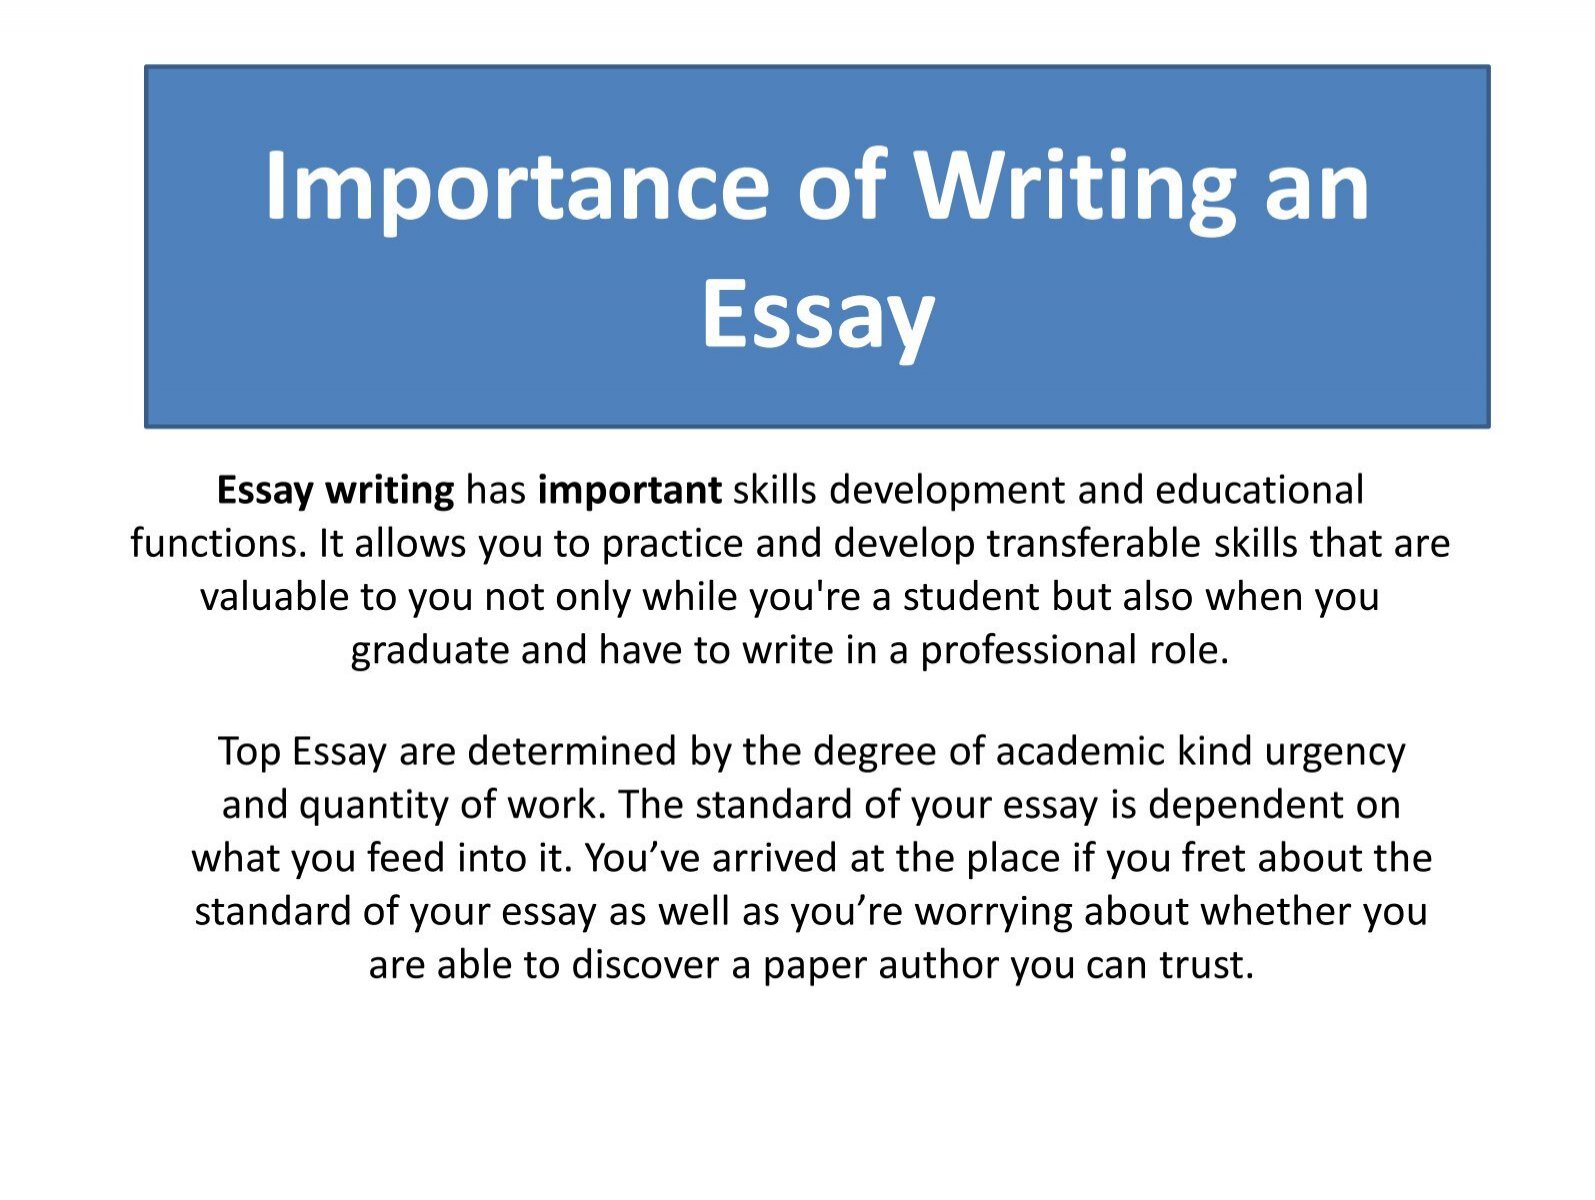 Want A Thriving Business? Focus On Write My Essay!